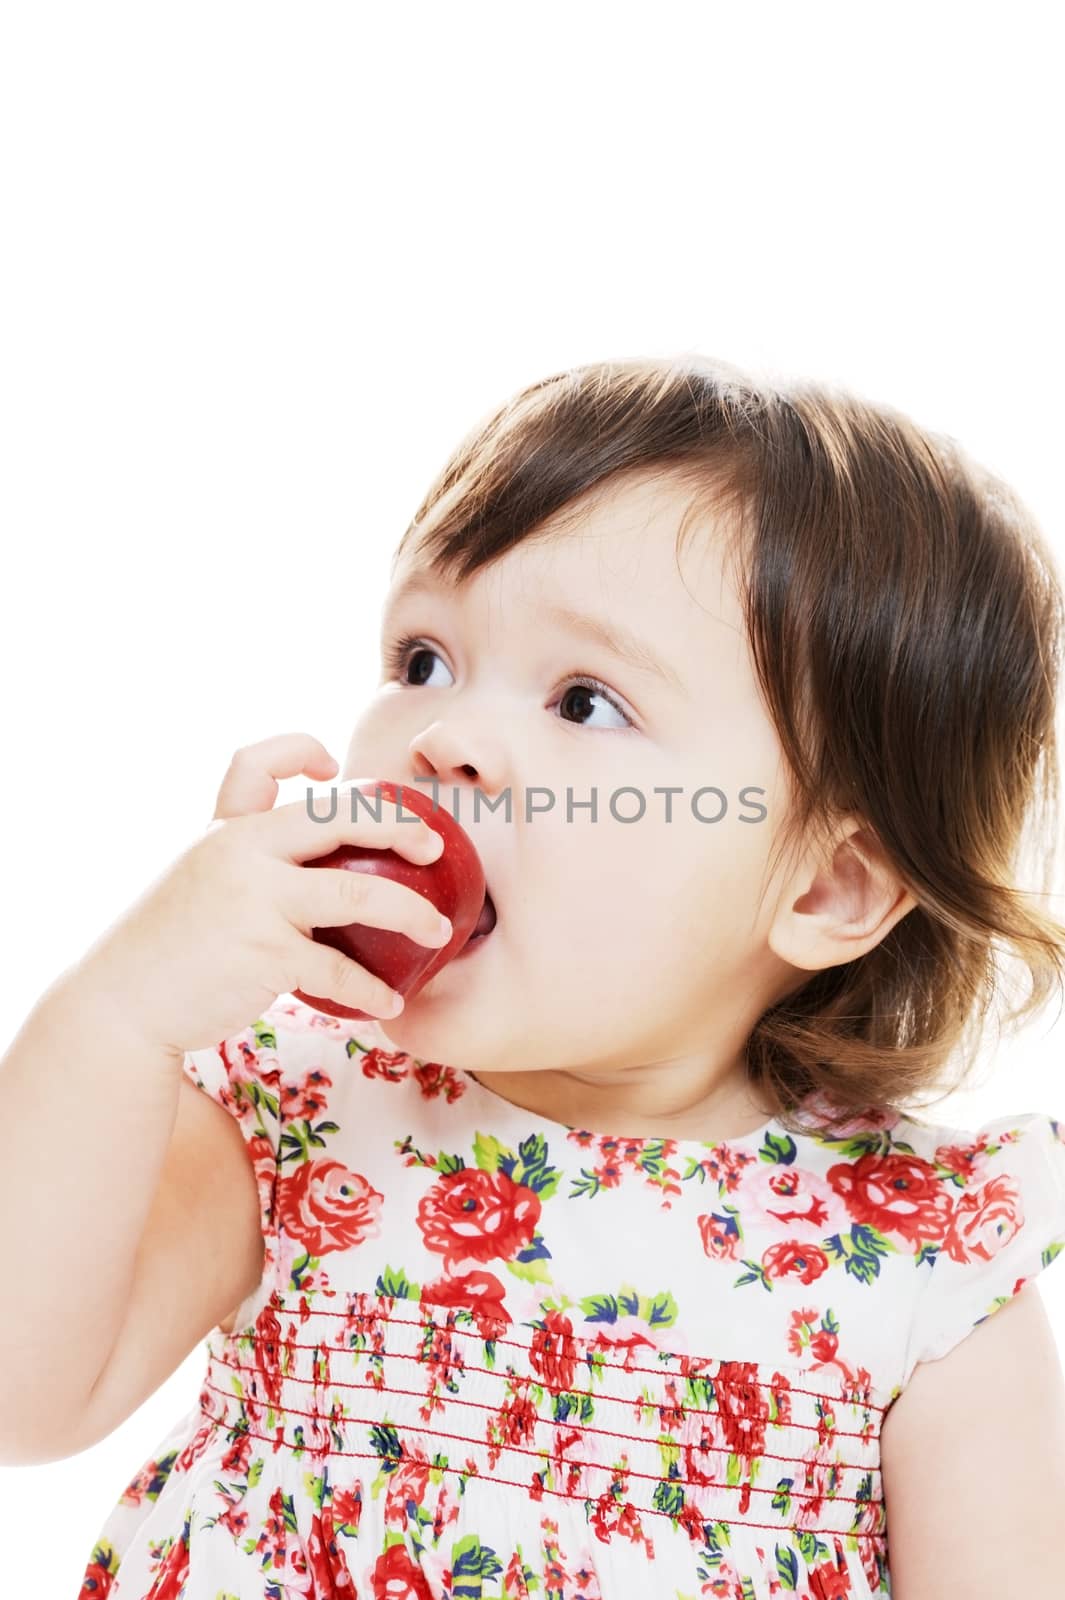 Closeup portrait of young infant eating apple